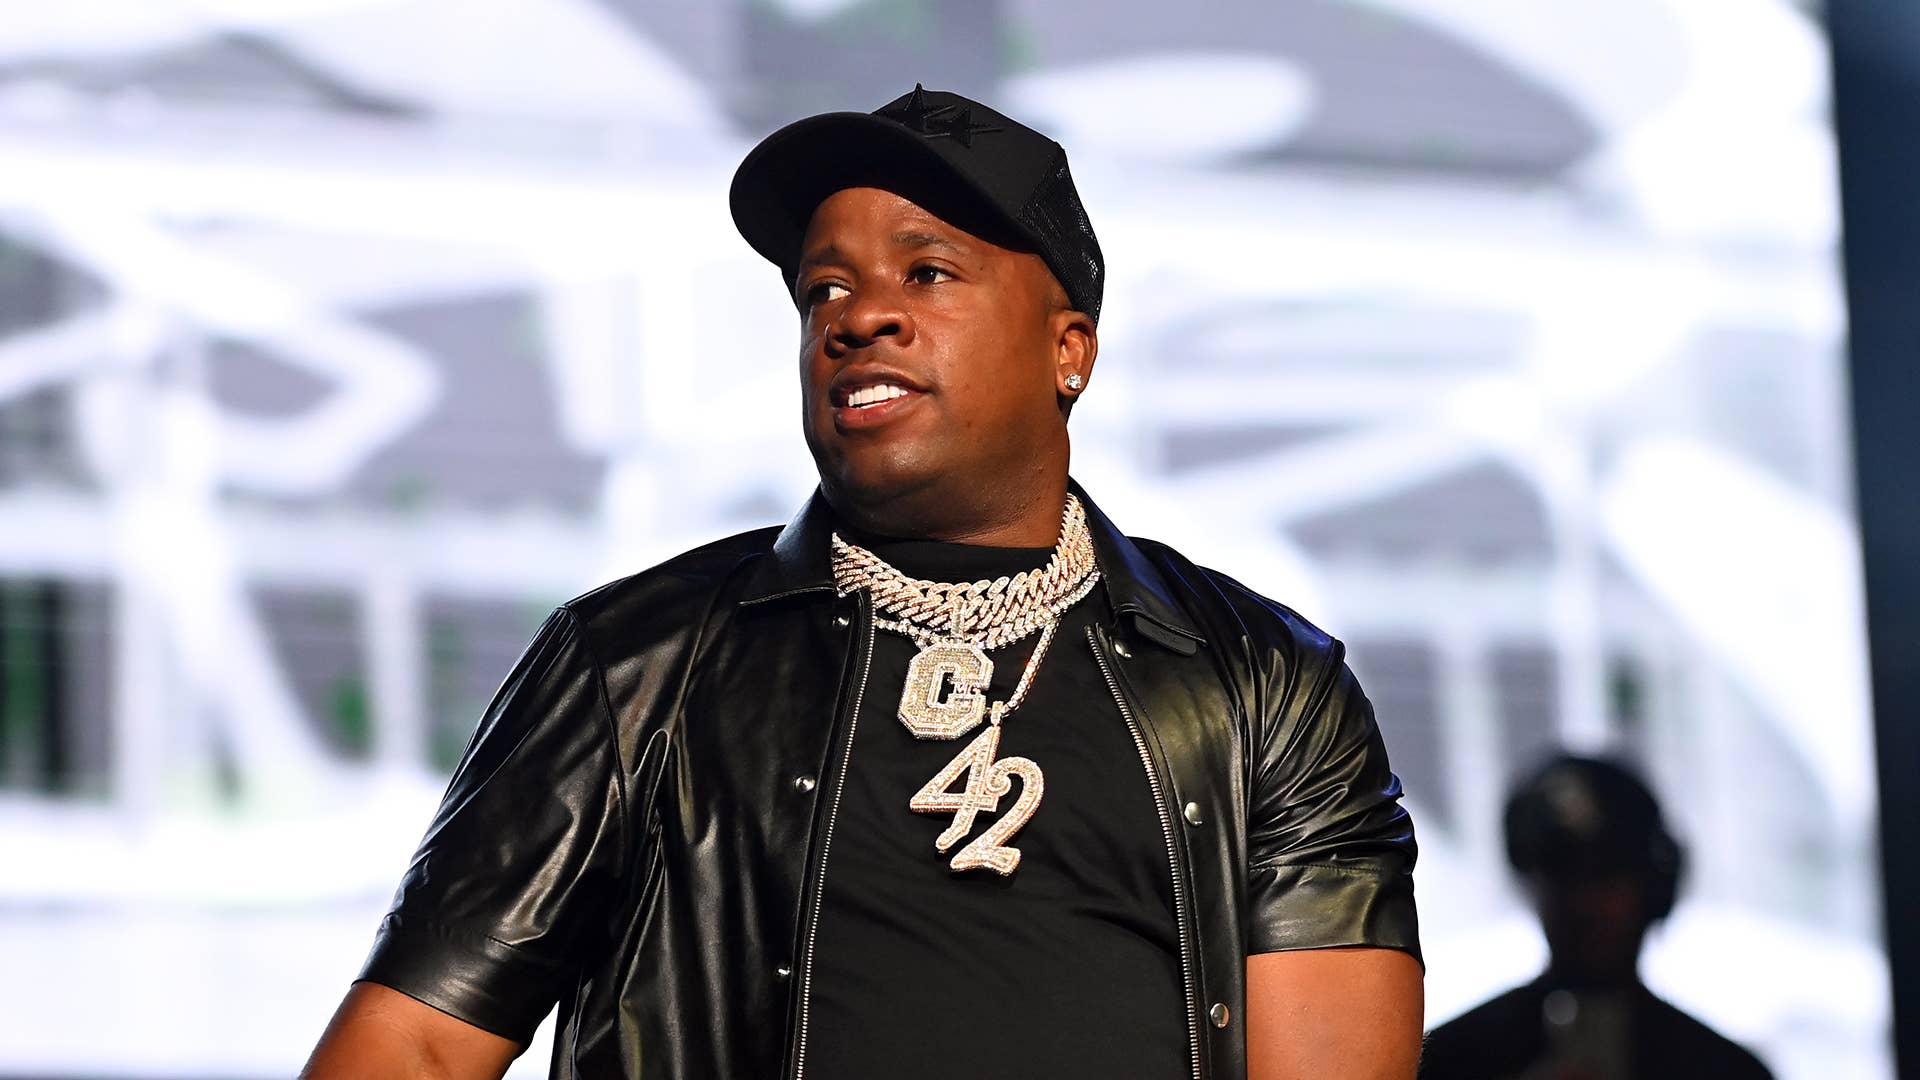 Rapper Yo Gotti performs onstage during 2022 Spring Music Fest at State Farm Arena